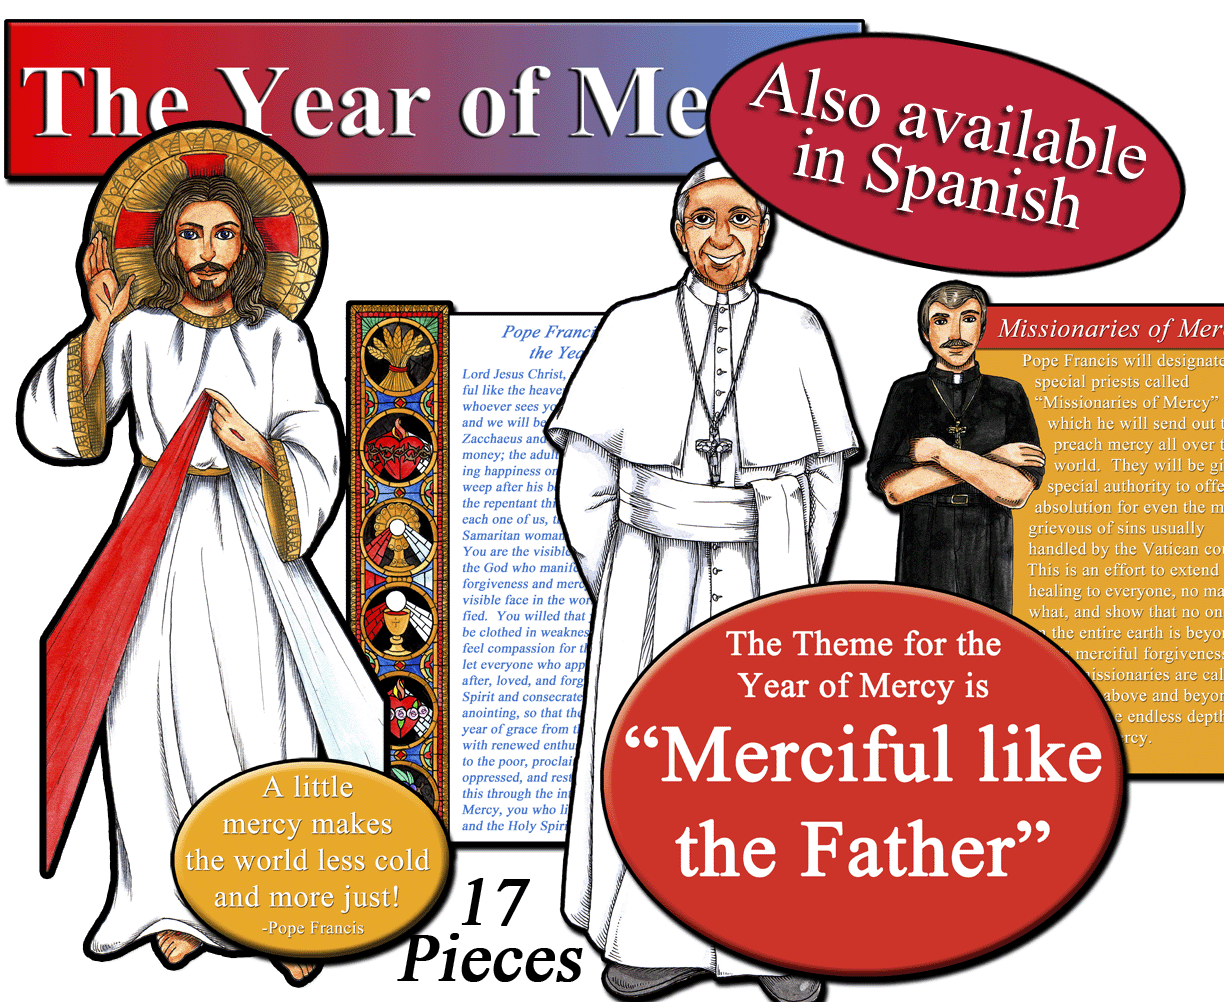 The Year of Mercy